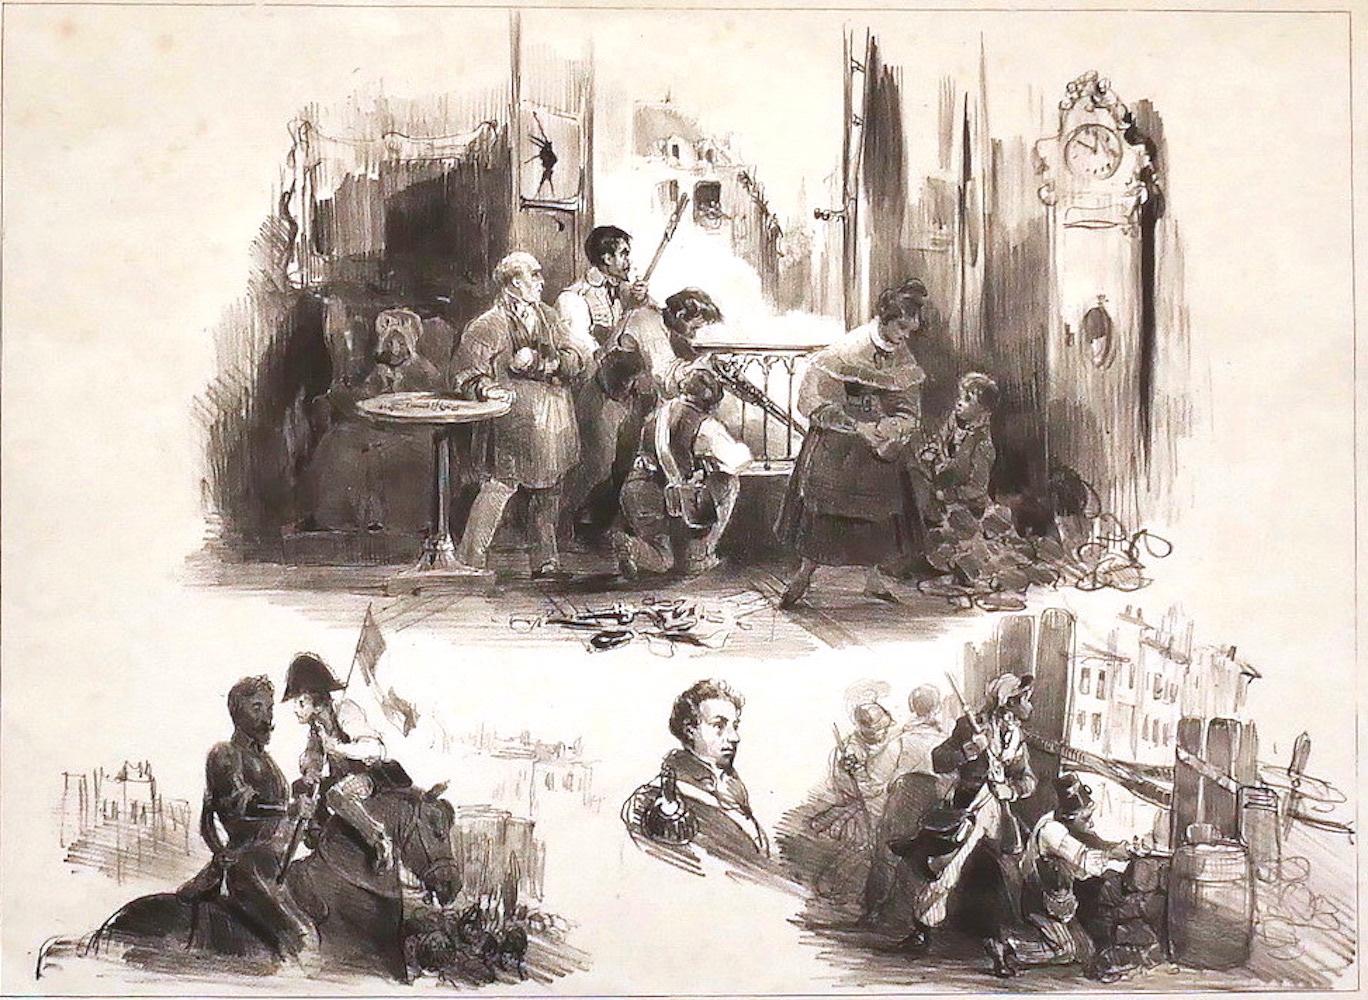 Camille Roqueplan Figurative Print - The Last Youngs of July 1830 - Original Lithograph by C. Roqueplan - 1836